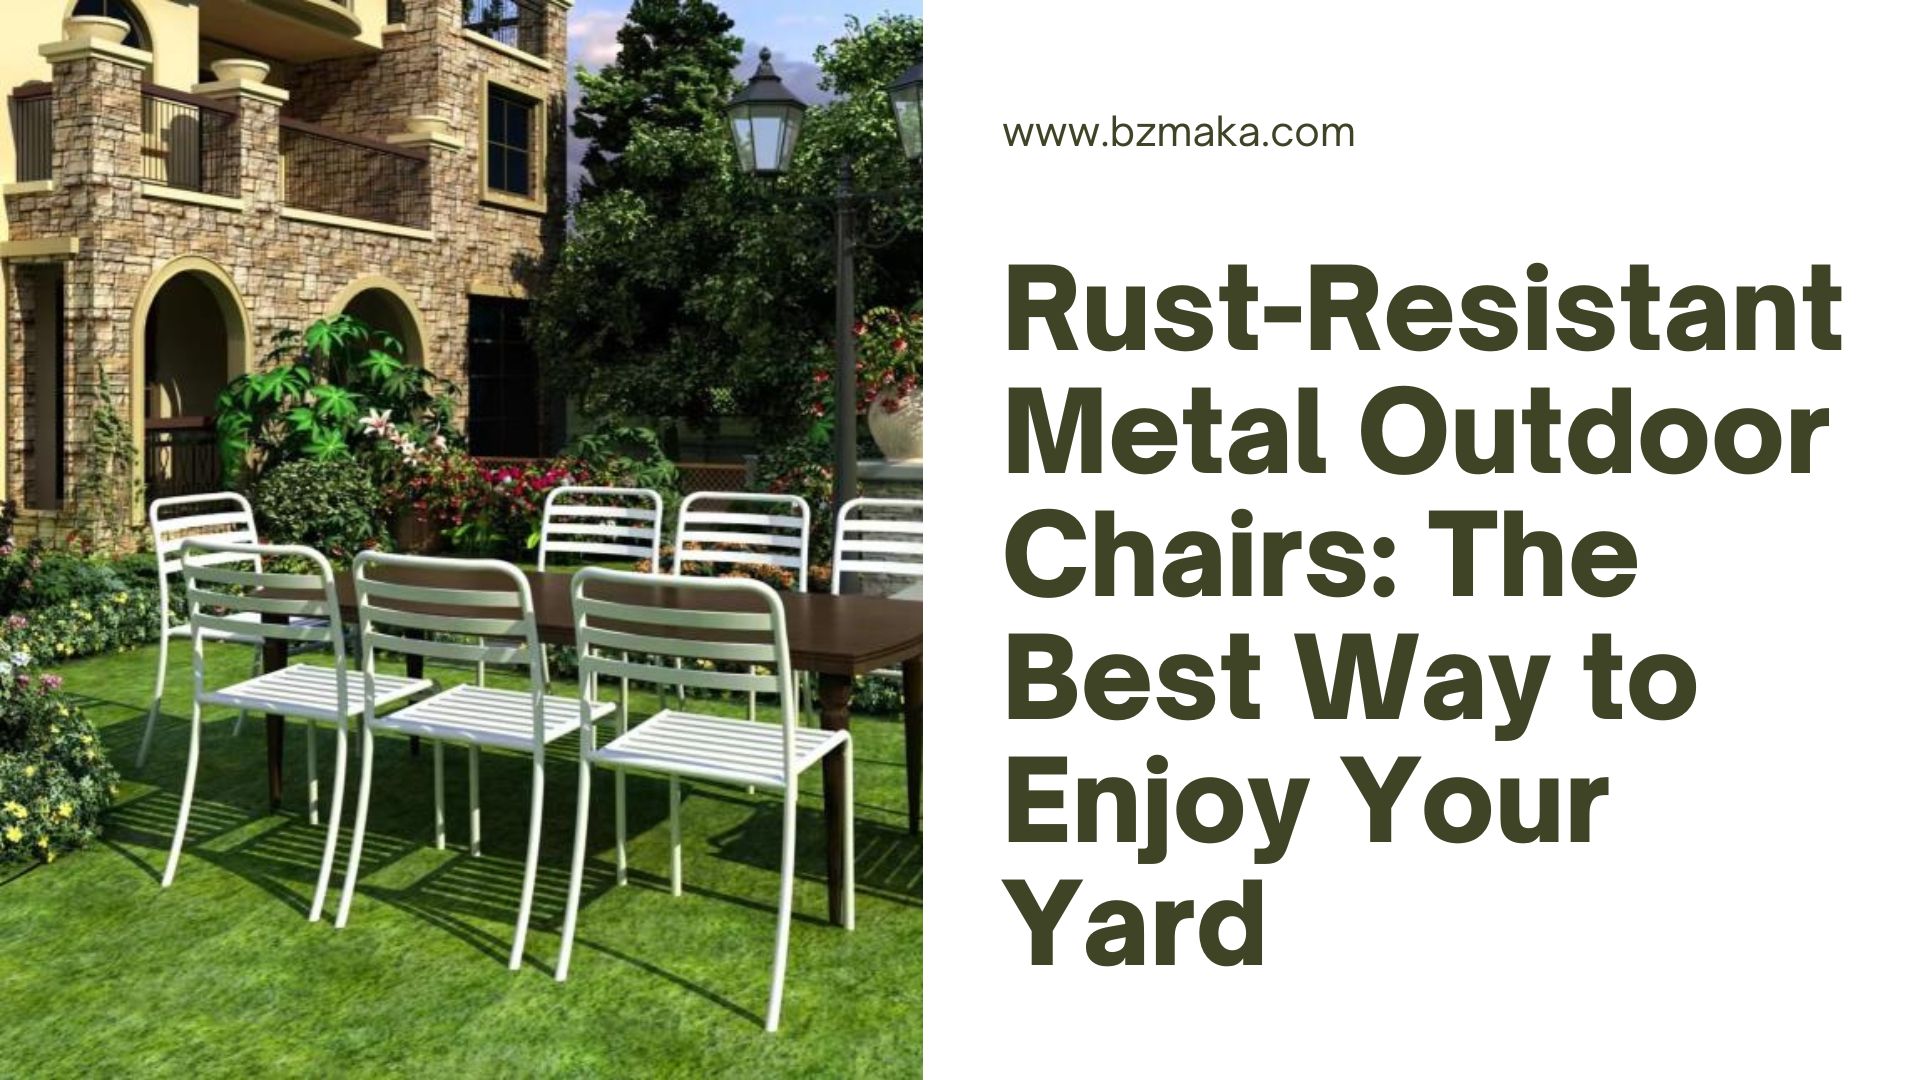 Rust Resistant Metal Outdoor Chairs The Best Way to Enjoy Your Yard